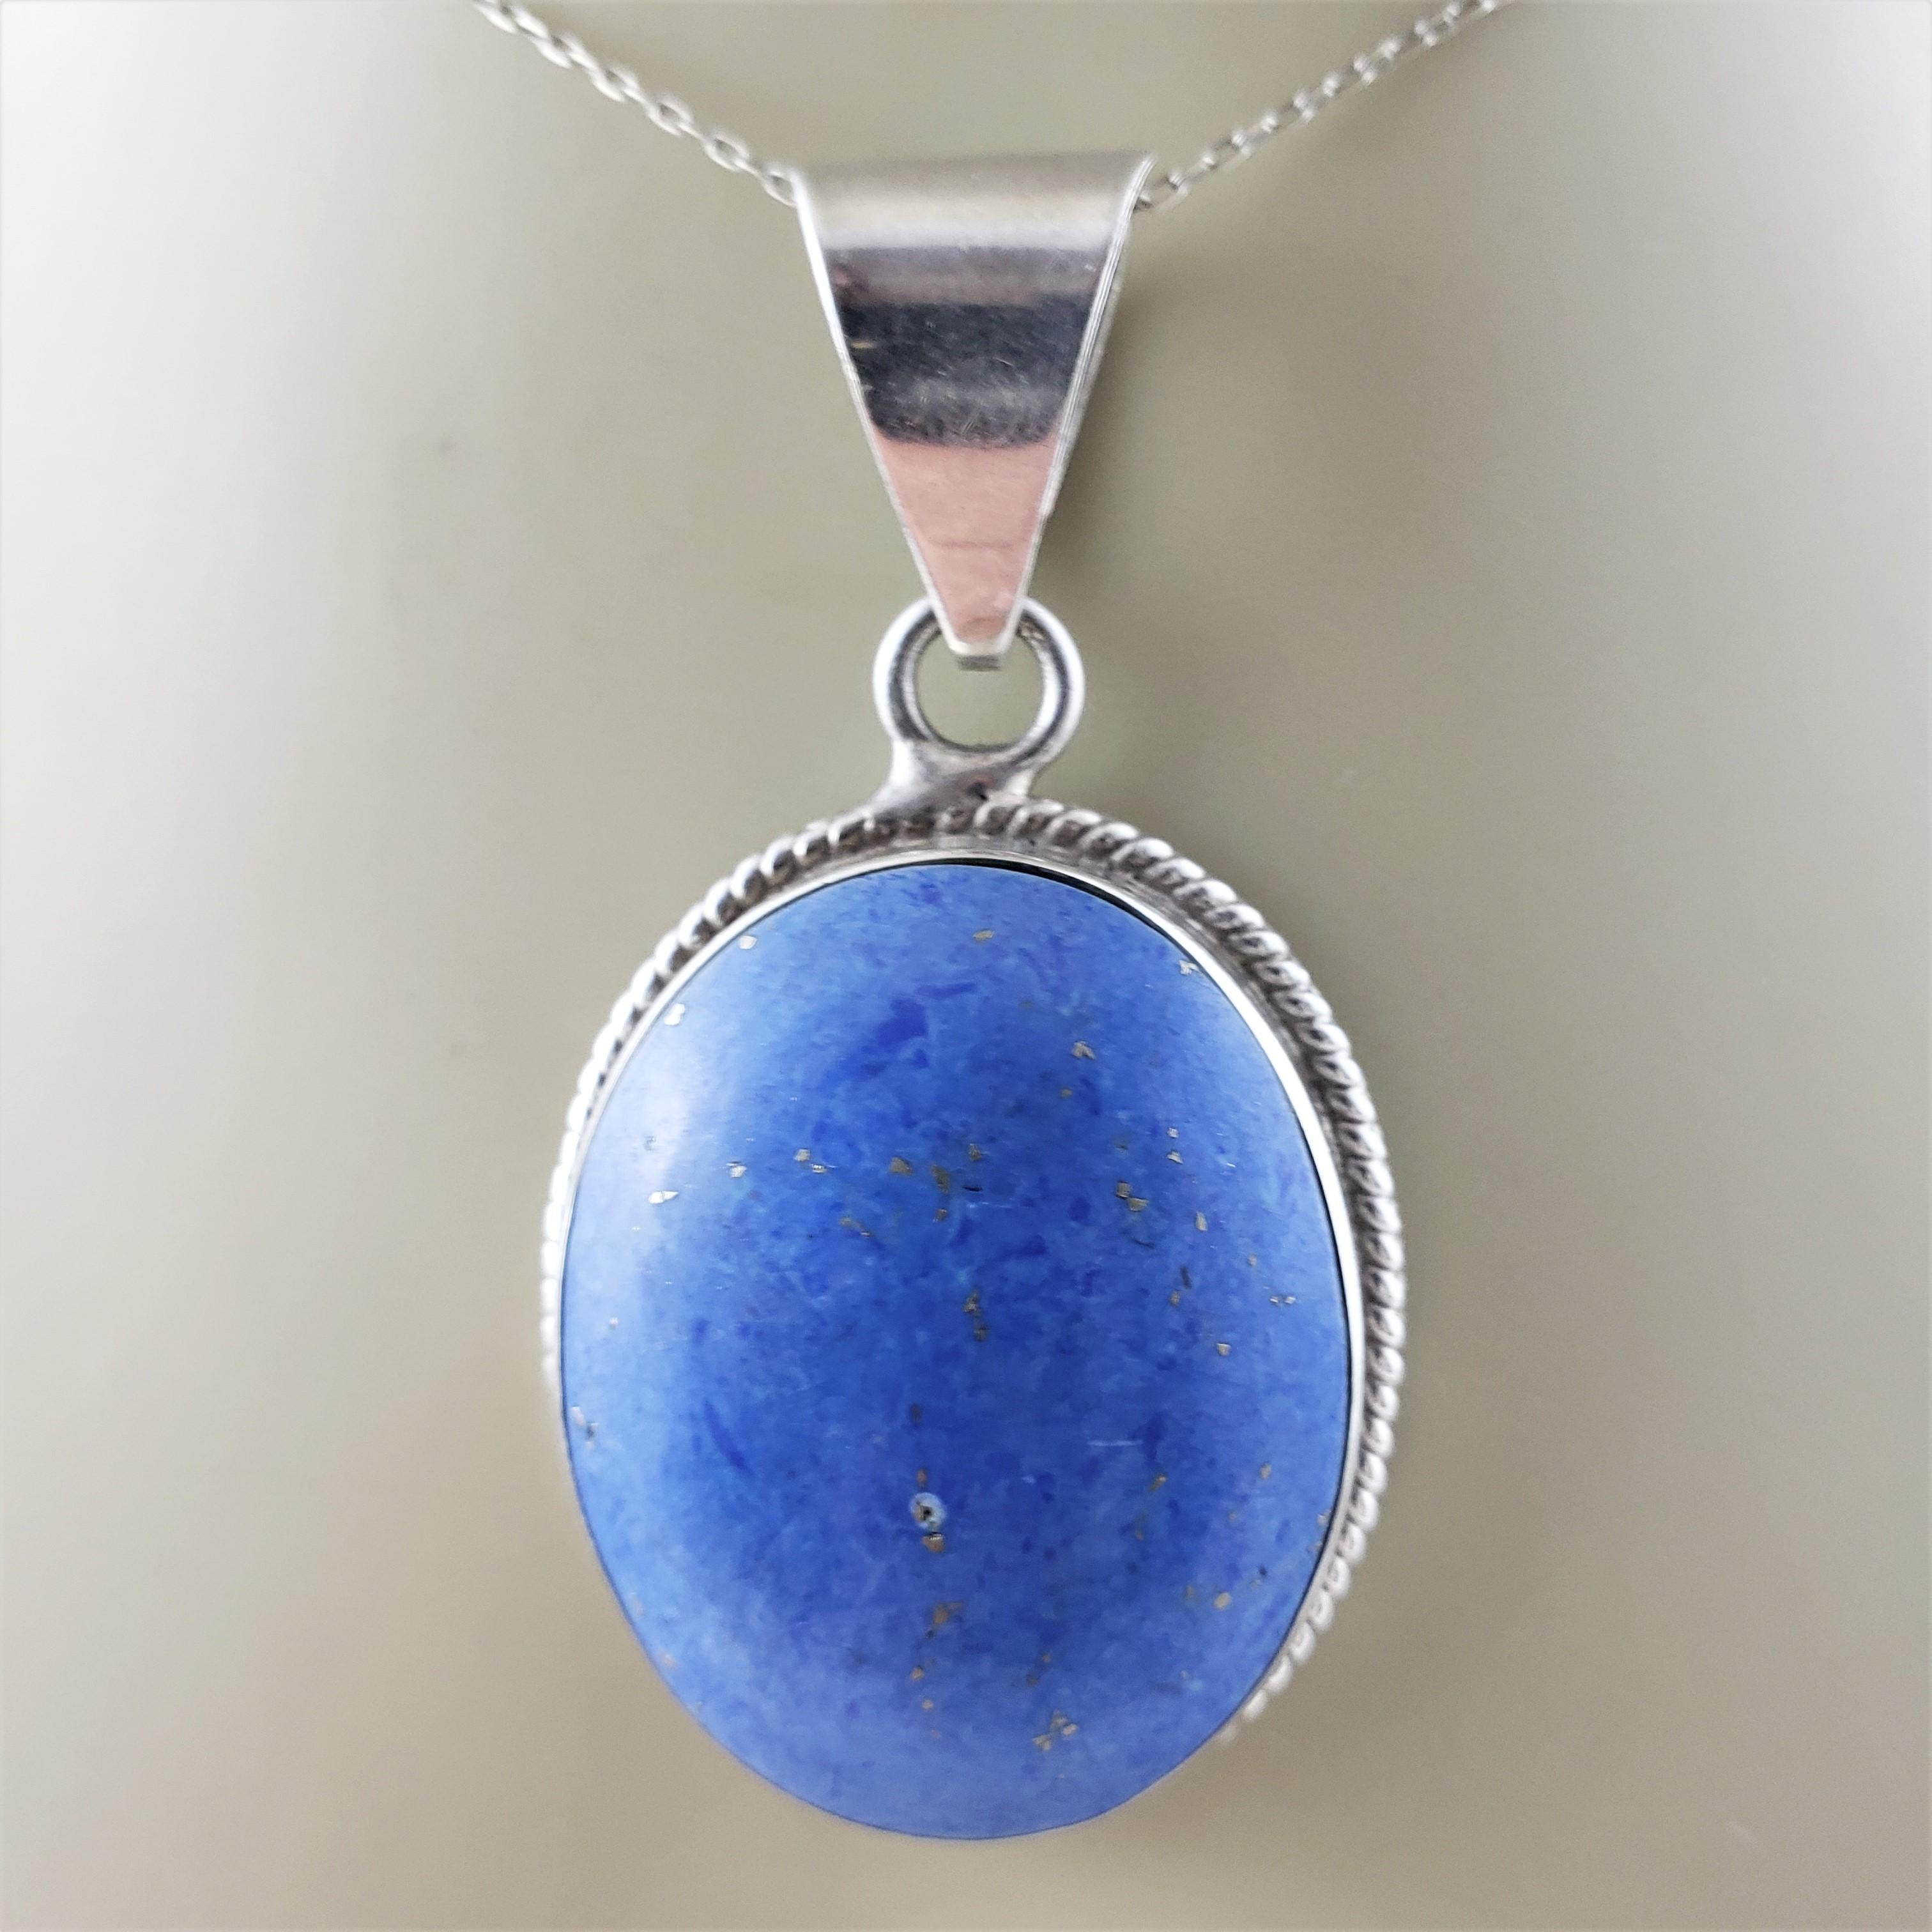 Women's or Men's Taxco Mexico TM-287 Sterling Silver and Denim Lapis Pendant